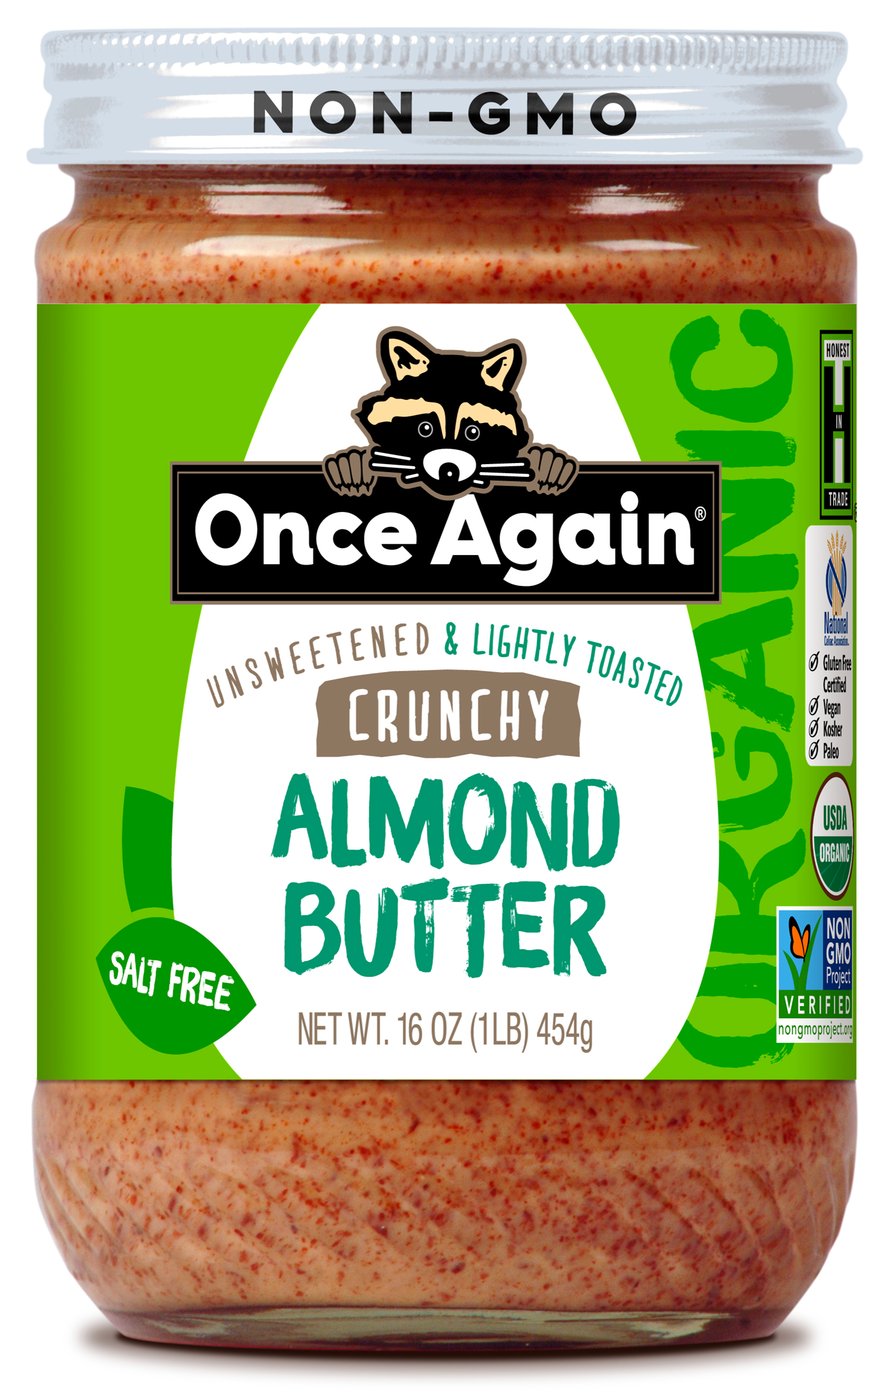 Organic Almond Butter (Lightly Toasted, Crunchy) photo